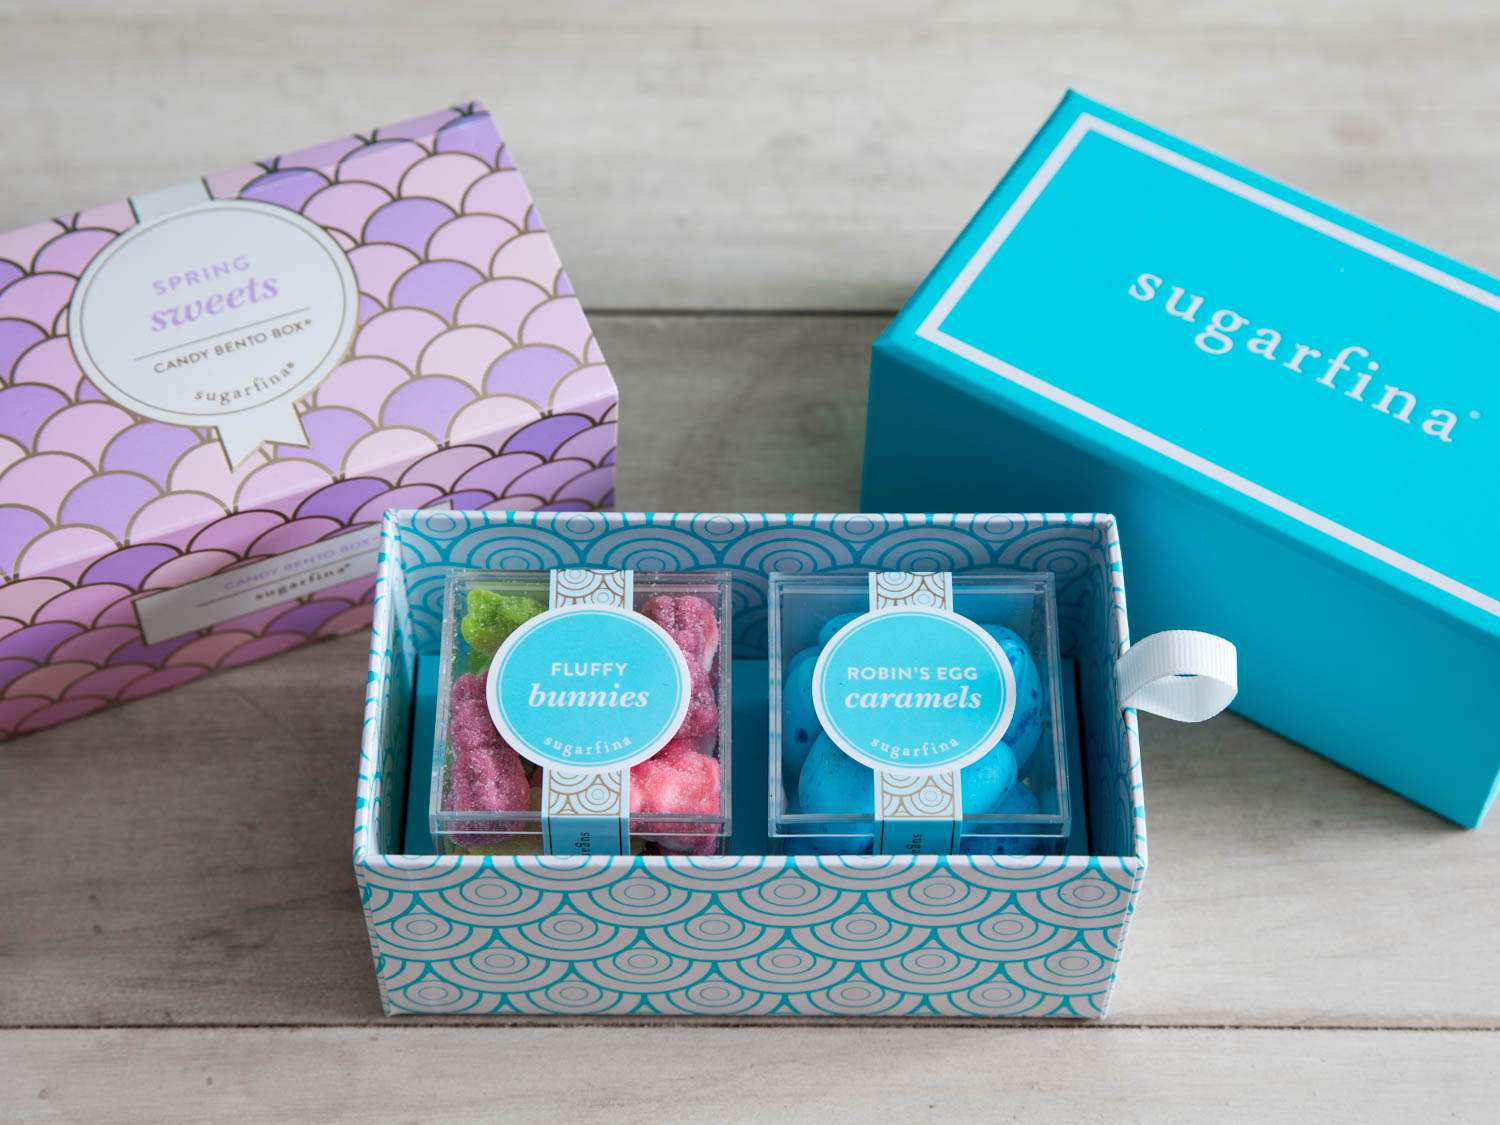 A box of candies from Sugarfina Sweets.